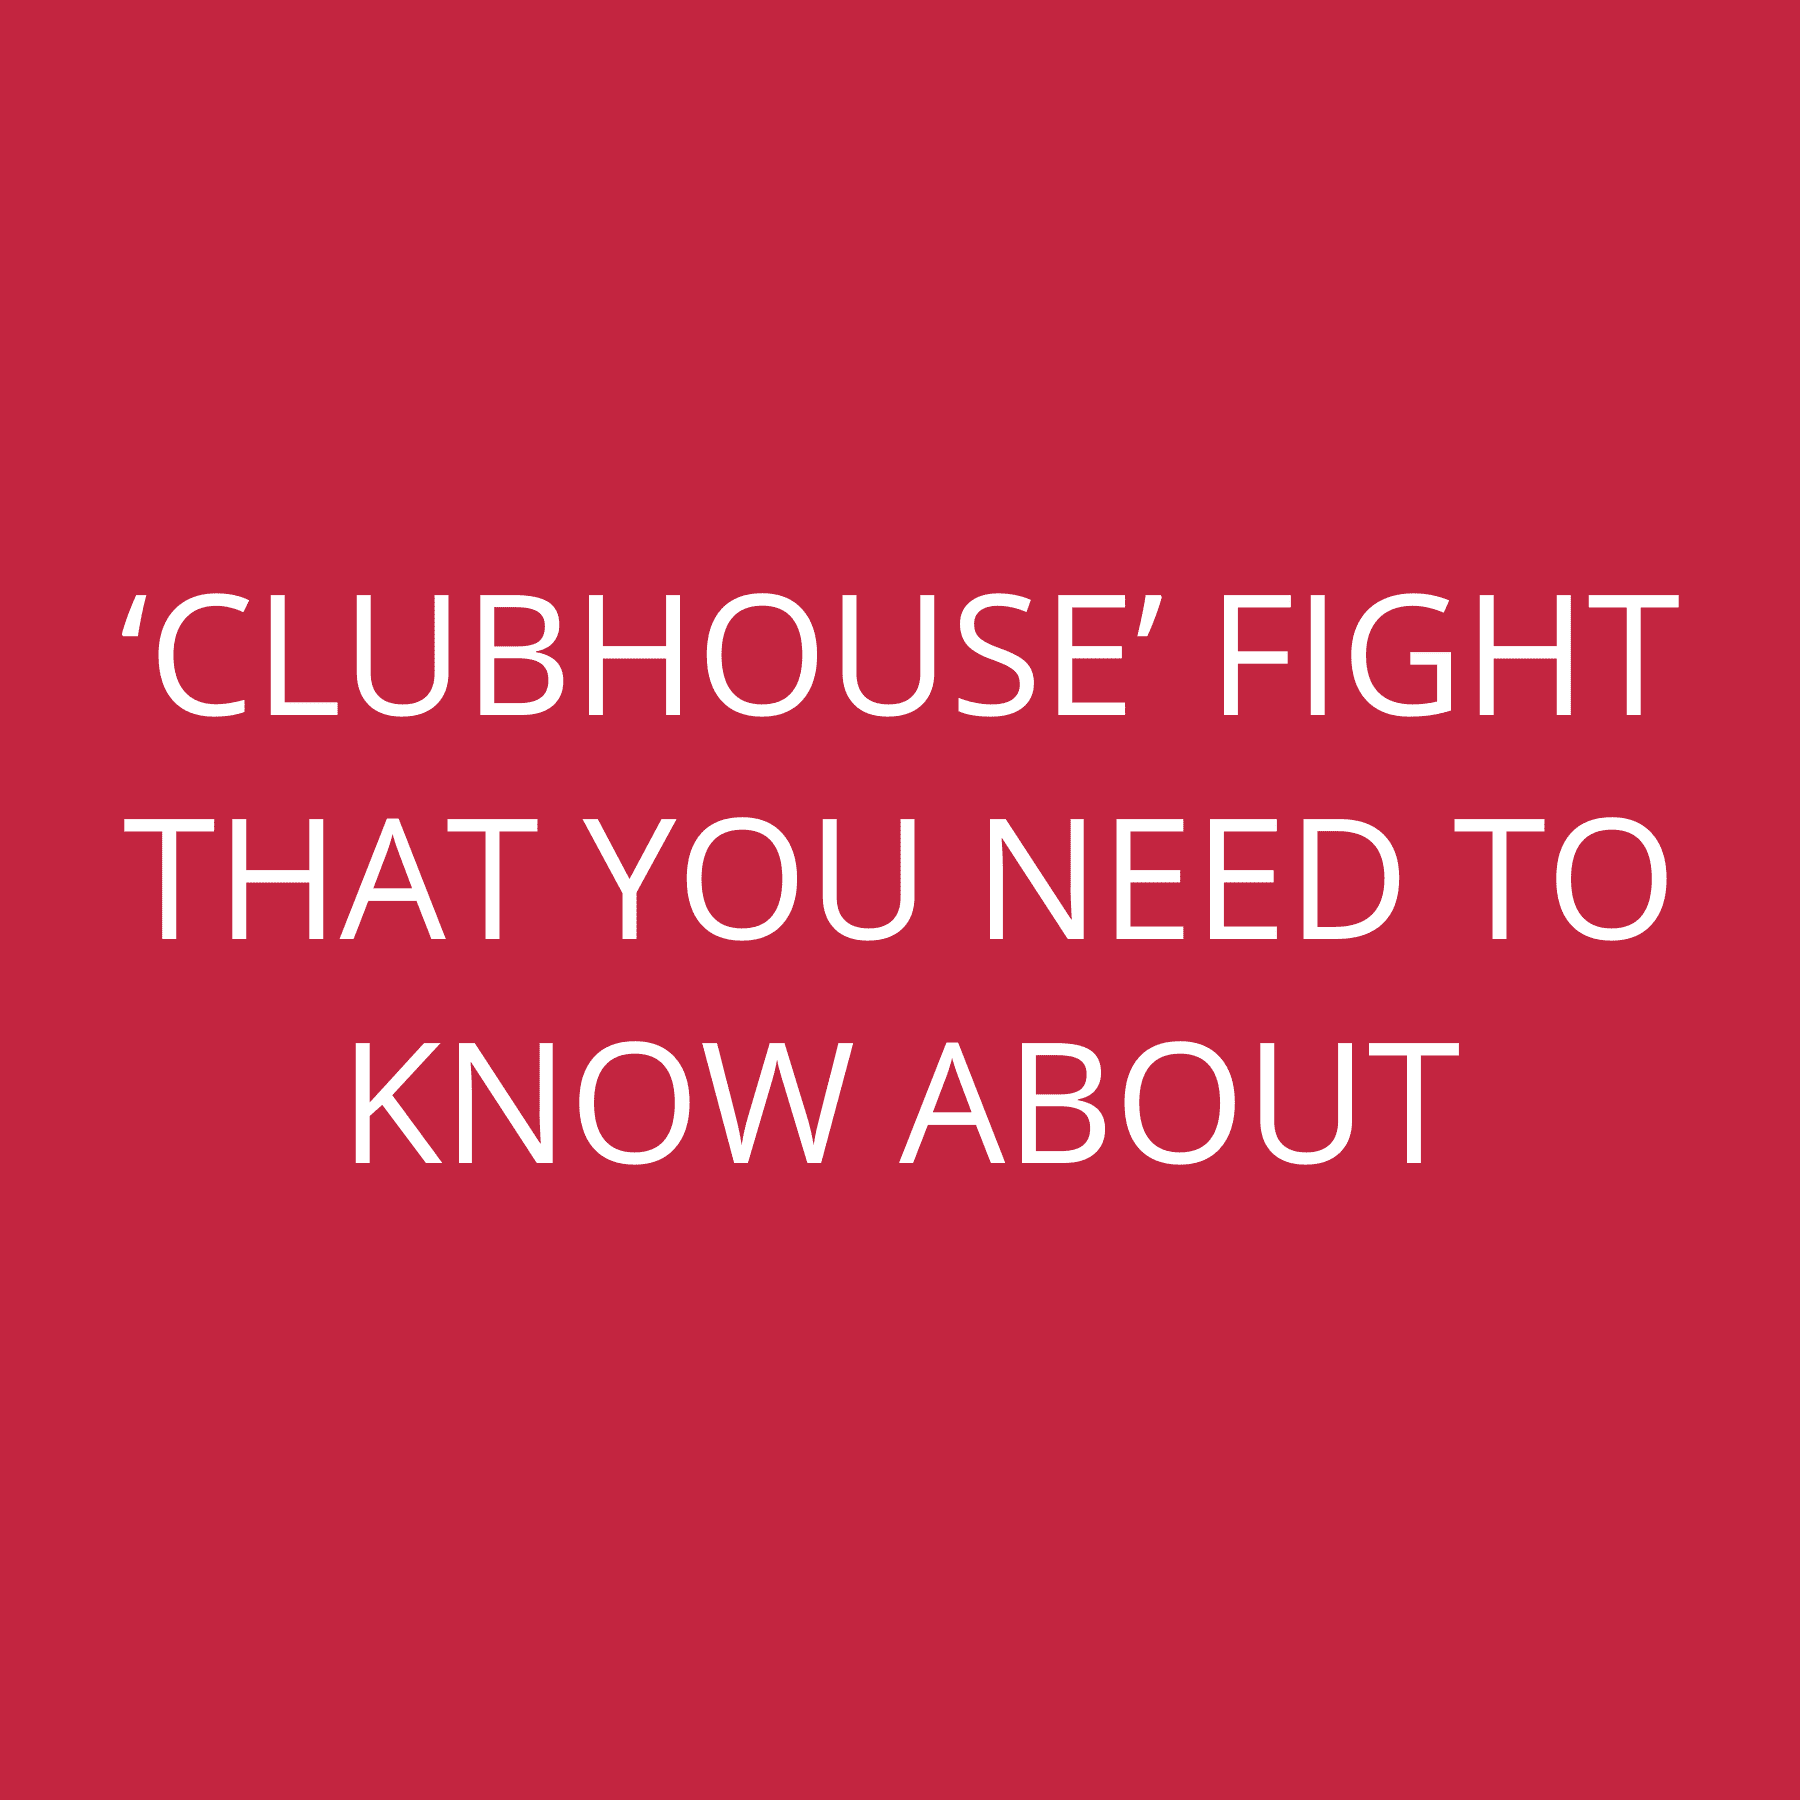 ‘Clubhouse’ fight that you need to know about